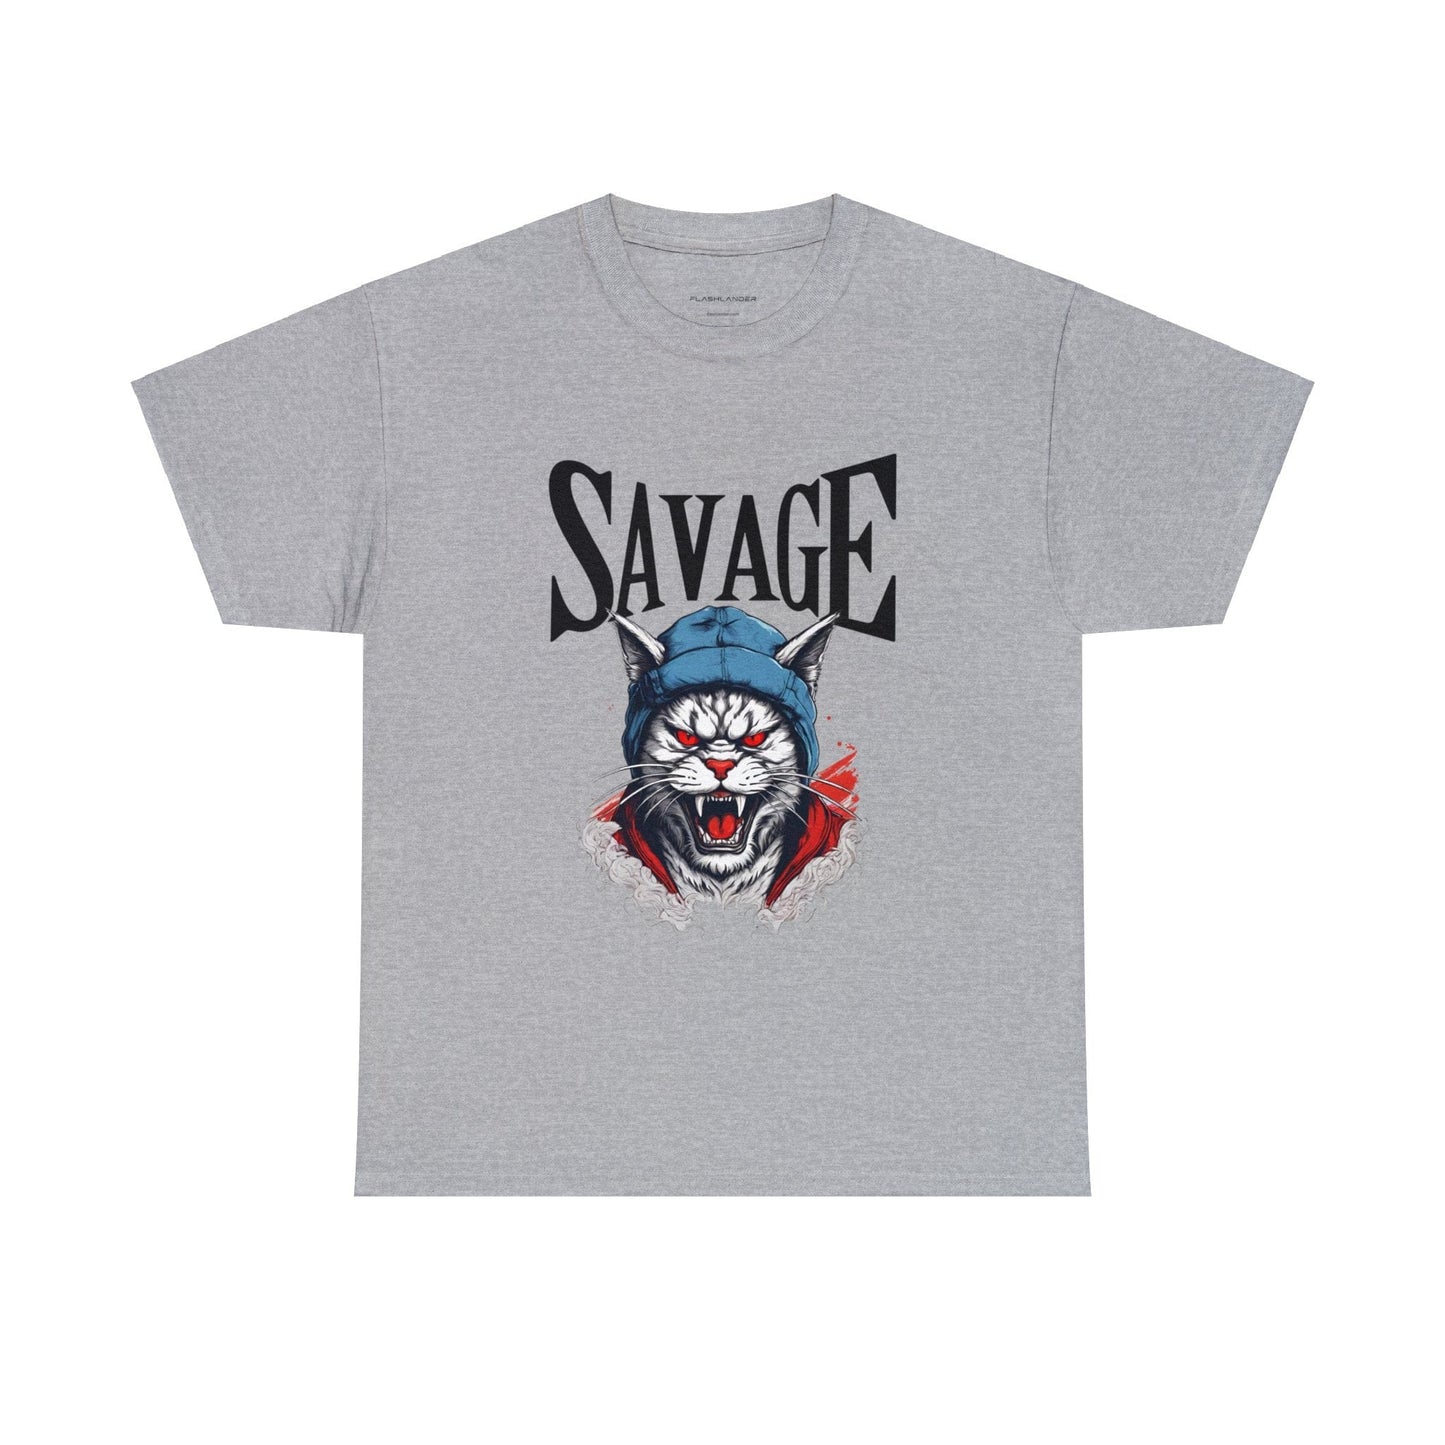 Japanese Cat Oni Tee Japanese aesthetic shirt Savage t-shirt tattoo art outfit edgy clothing soft grunge clothes Streetwear Unisex Tee